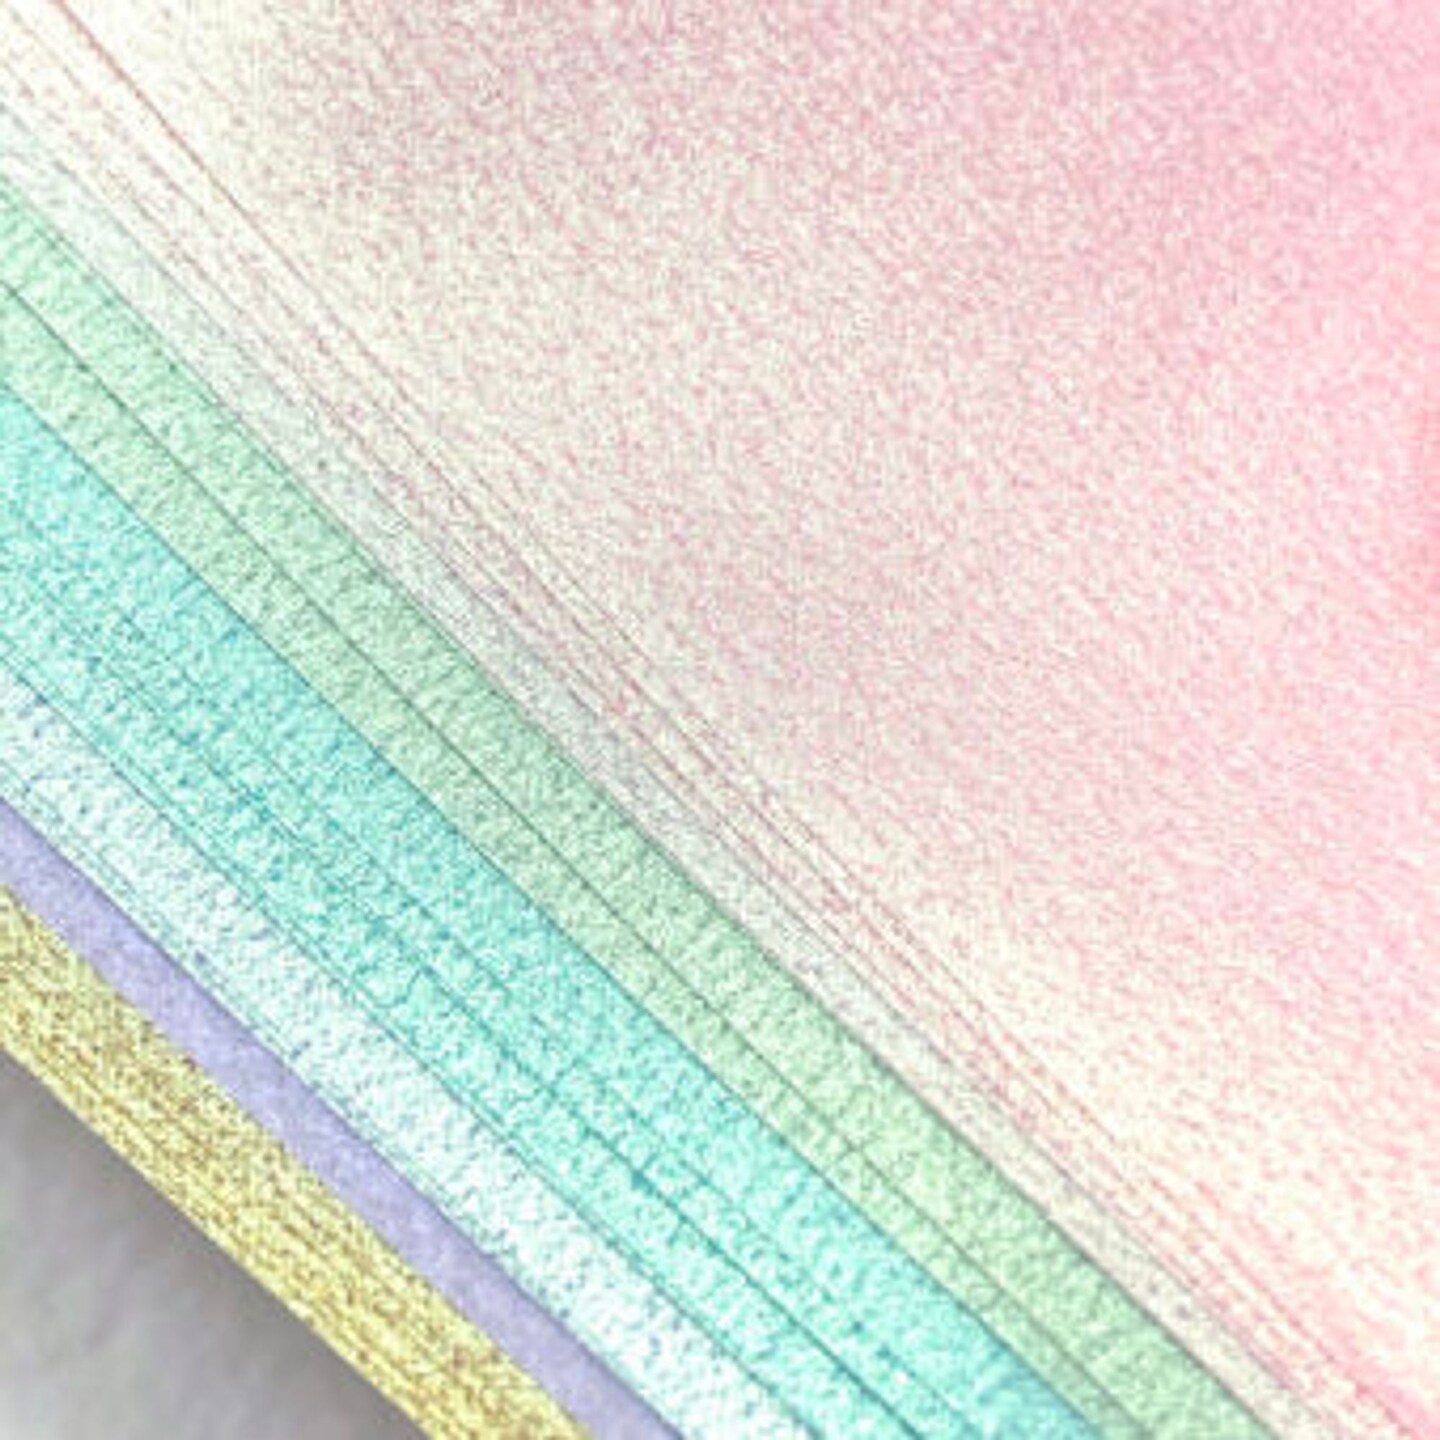 Et Cetera Papers Shimmer Vellum 6x6 - Spring Assortment - 10 Sheets(2 each of 5 colors)